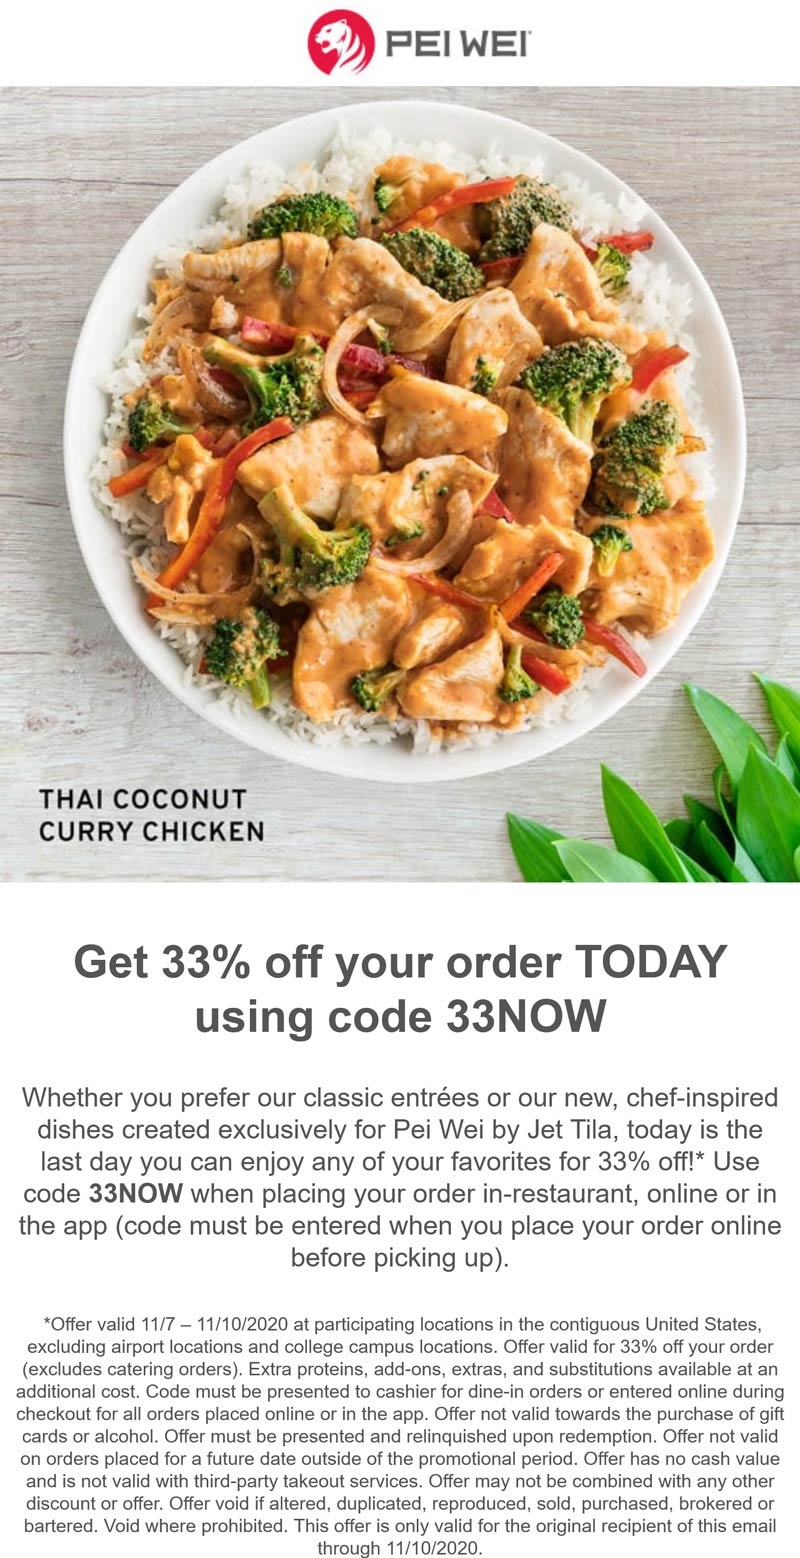 33 off today at Pei Wei restaurants via promo code 33NOW peiwei The